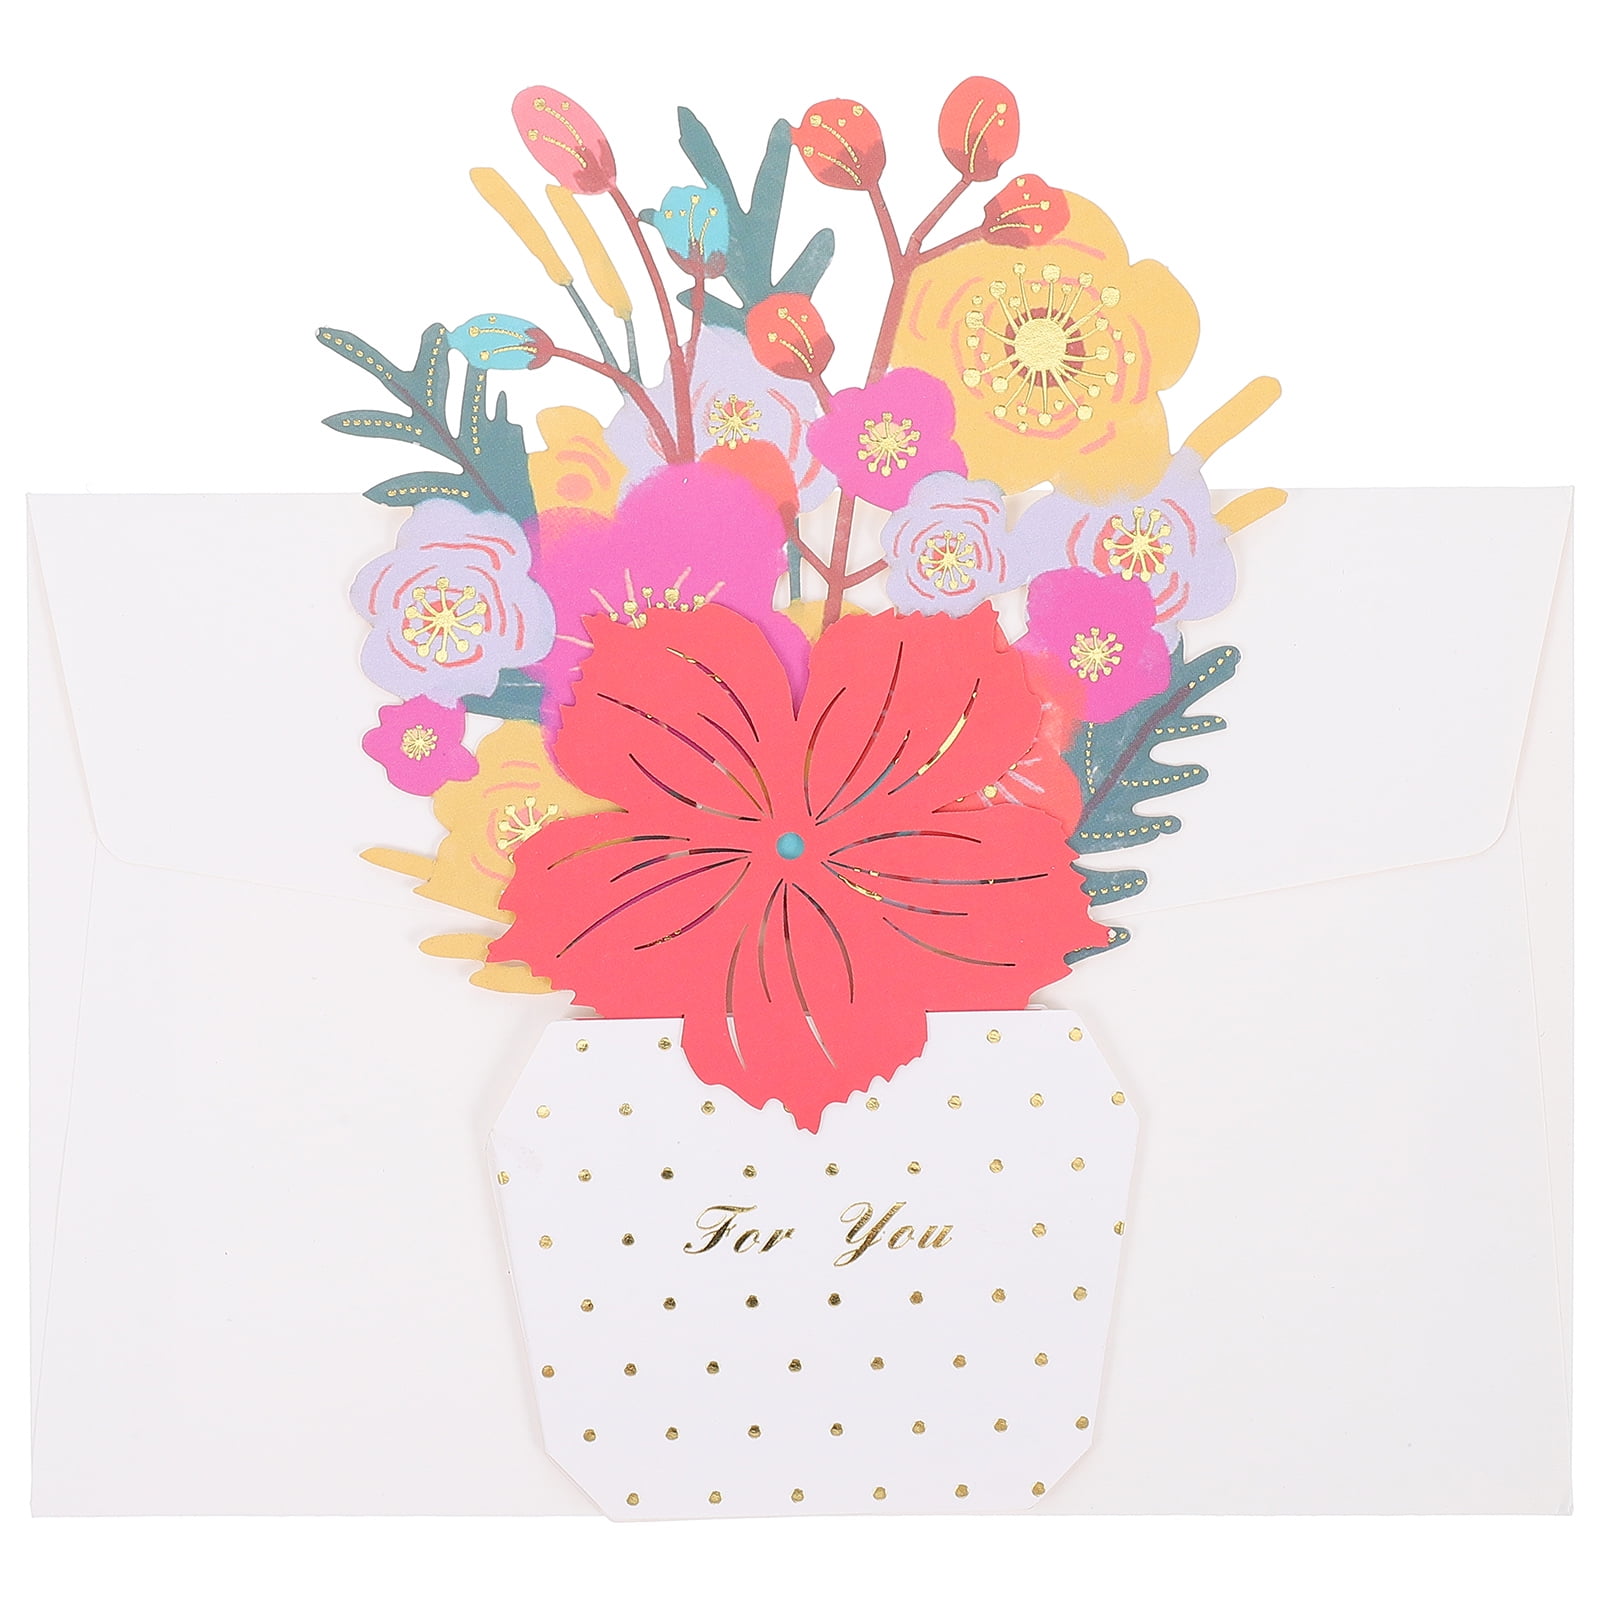 WQQZJJ Home Decor Clearance 3D Stereo Mother's Day Greeting Card Blessing Greeting  Card Paper Carved Flowers Festival Gift Large Bouquet Greeting Card  Ornament On Deals 